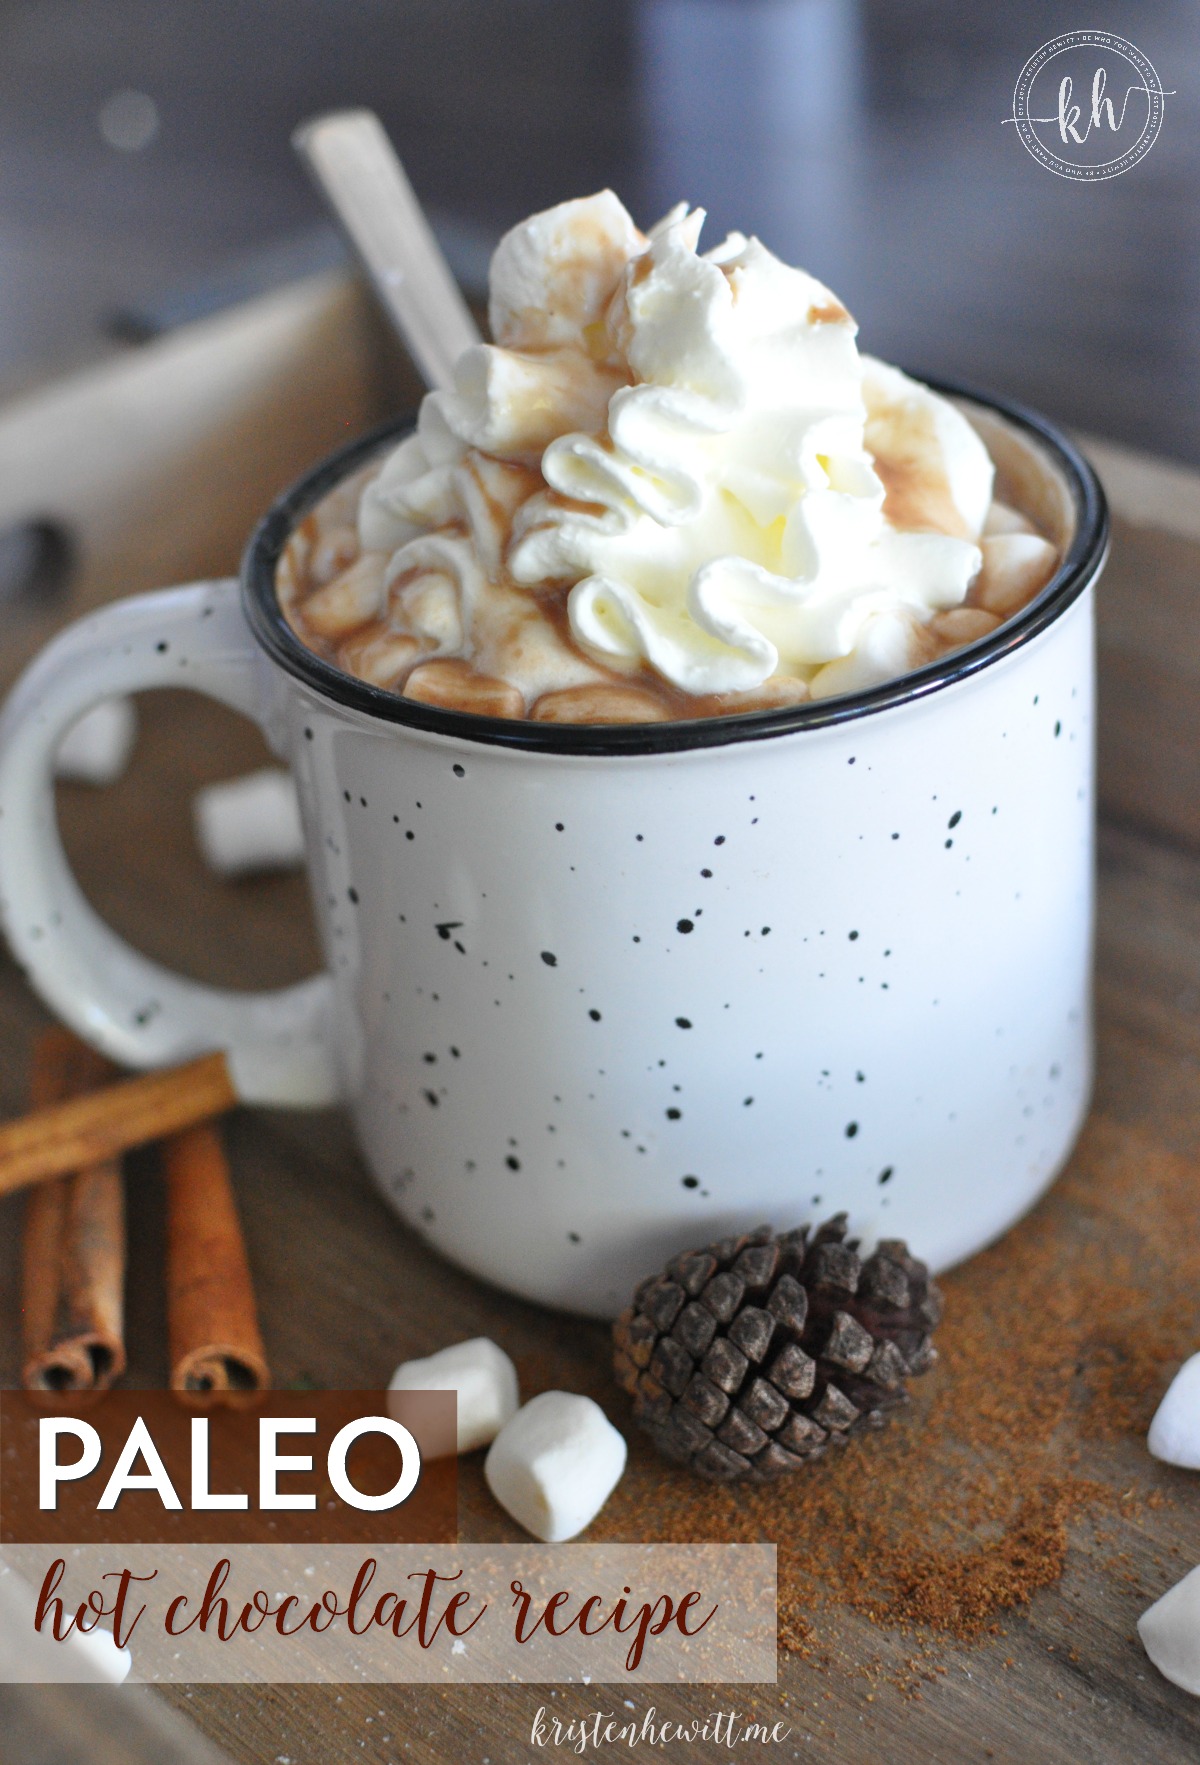 When the weather gets cold the first thing you need is a warm mug of this DELISH and simple paleo hot chocolate! Get the recipe here.